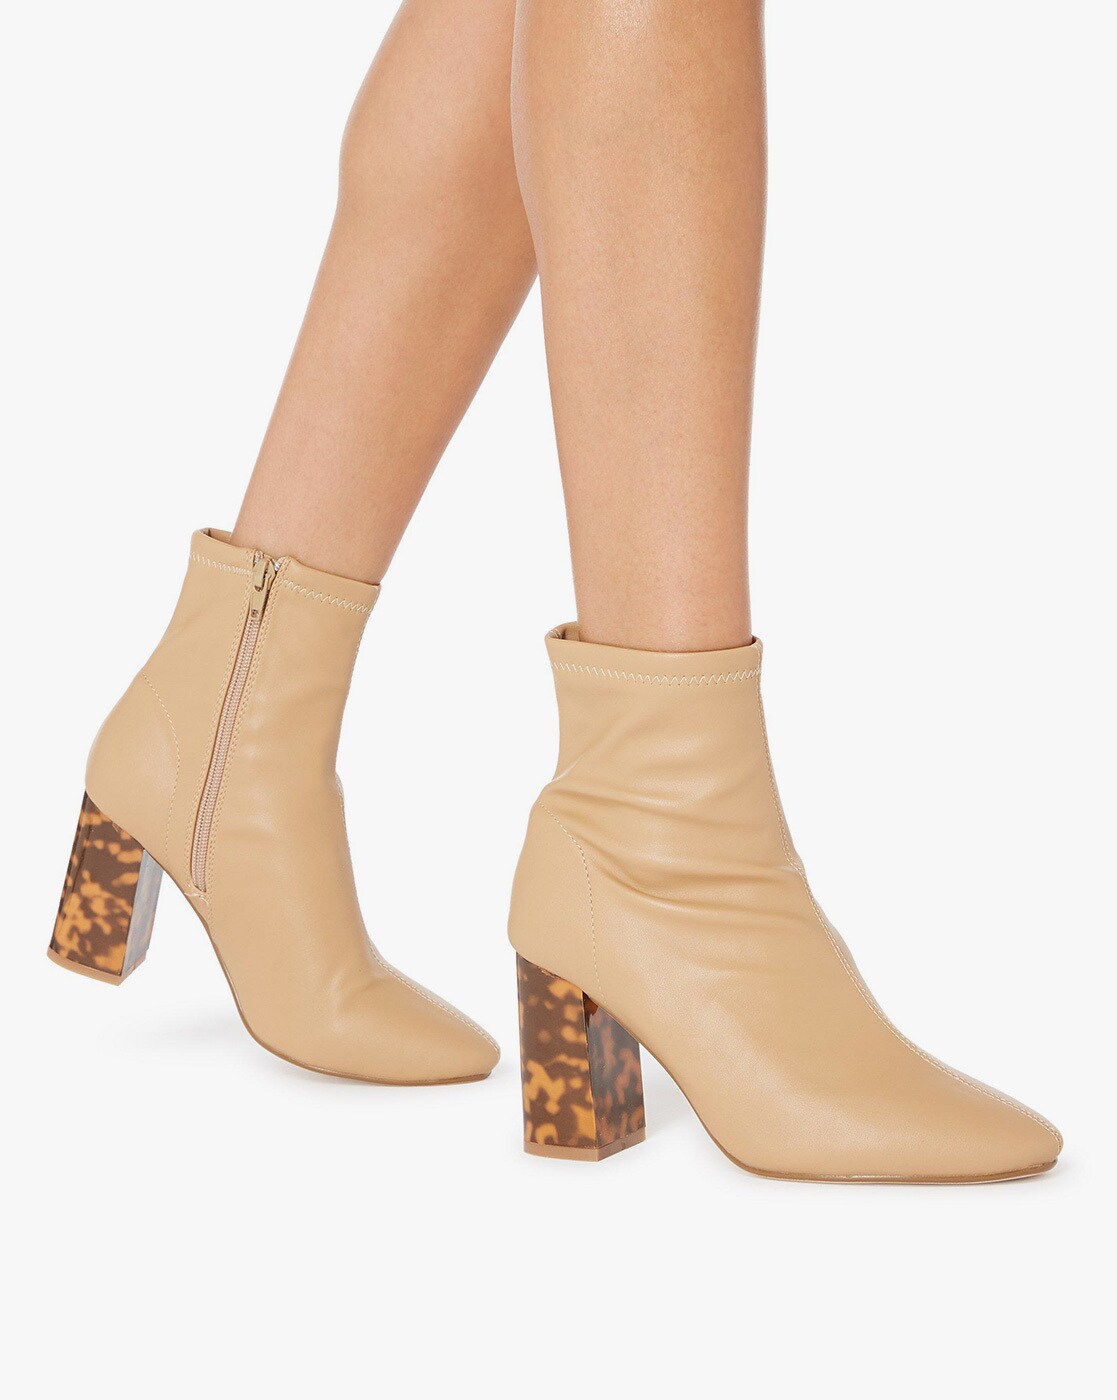 Buy Nude Boots for Women by Dune London 